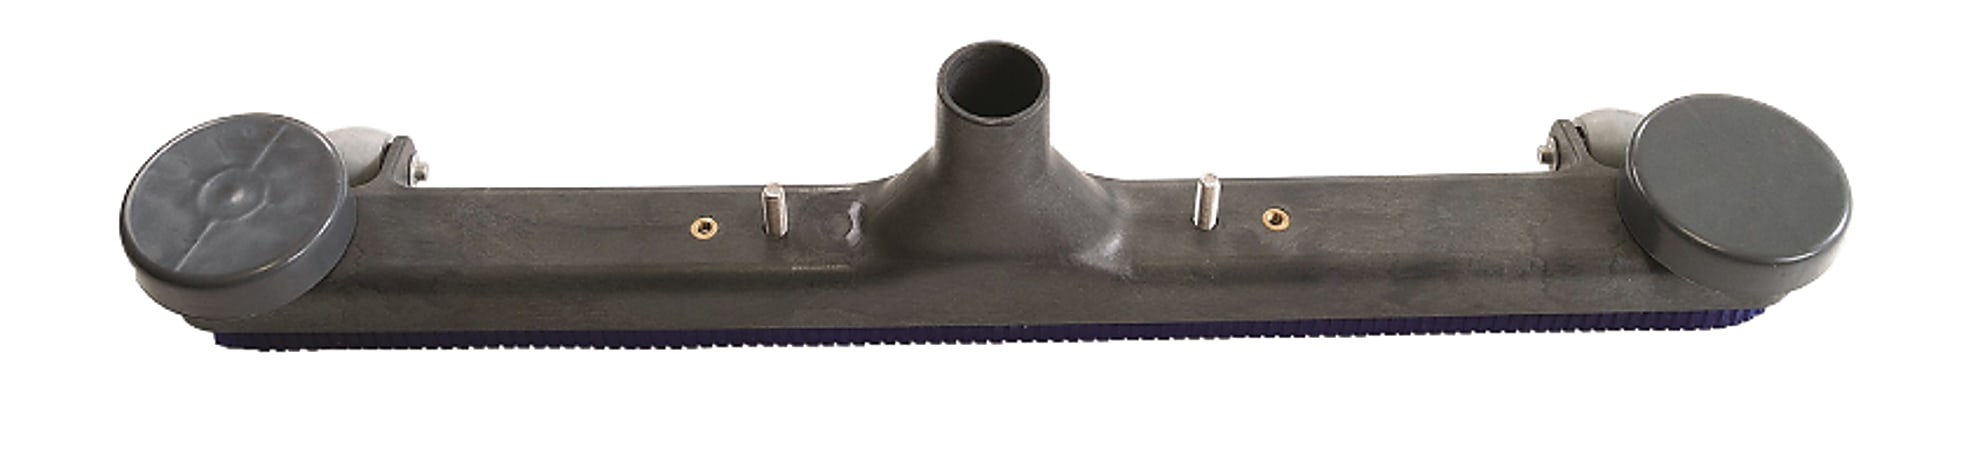 Clarke® Summit Pro 18SQ Wet/Dry Vacuum Replacement Front-Mounted Squeegee Kit, 2" x 24" x 2", Gray